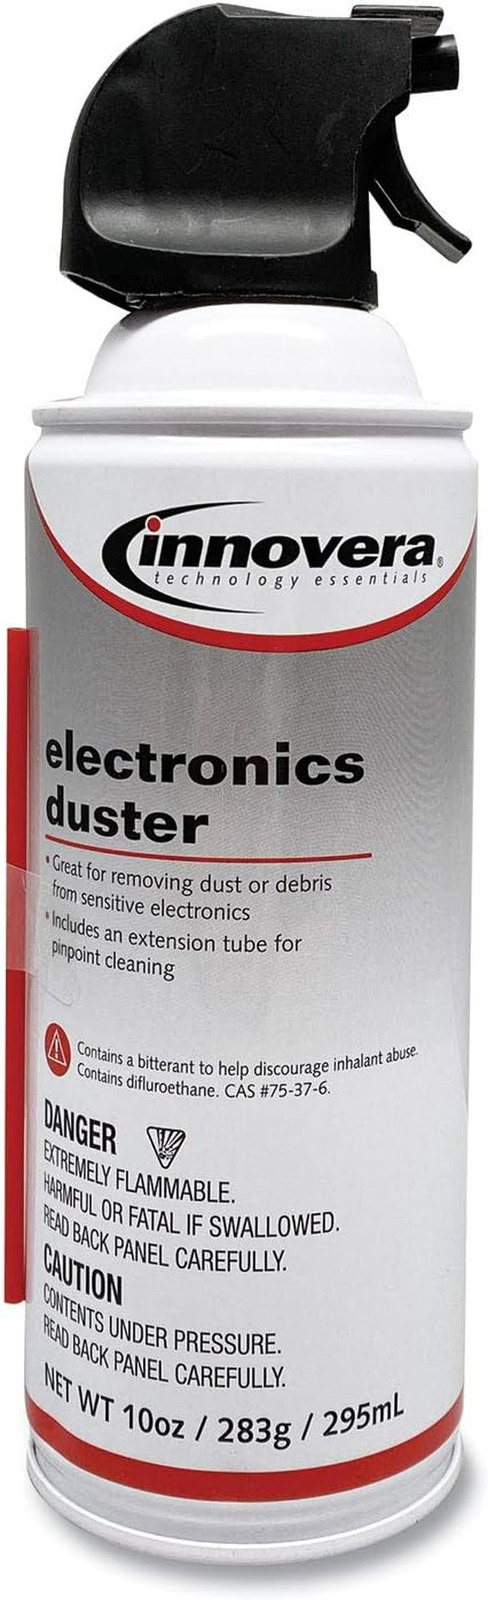 10 Oz Compressed Air Duster Cleaner Powerful Air Blower Electronics Keyboard 